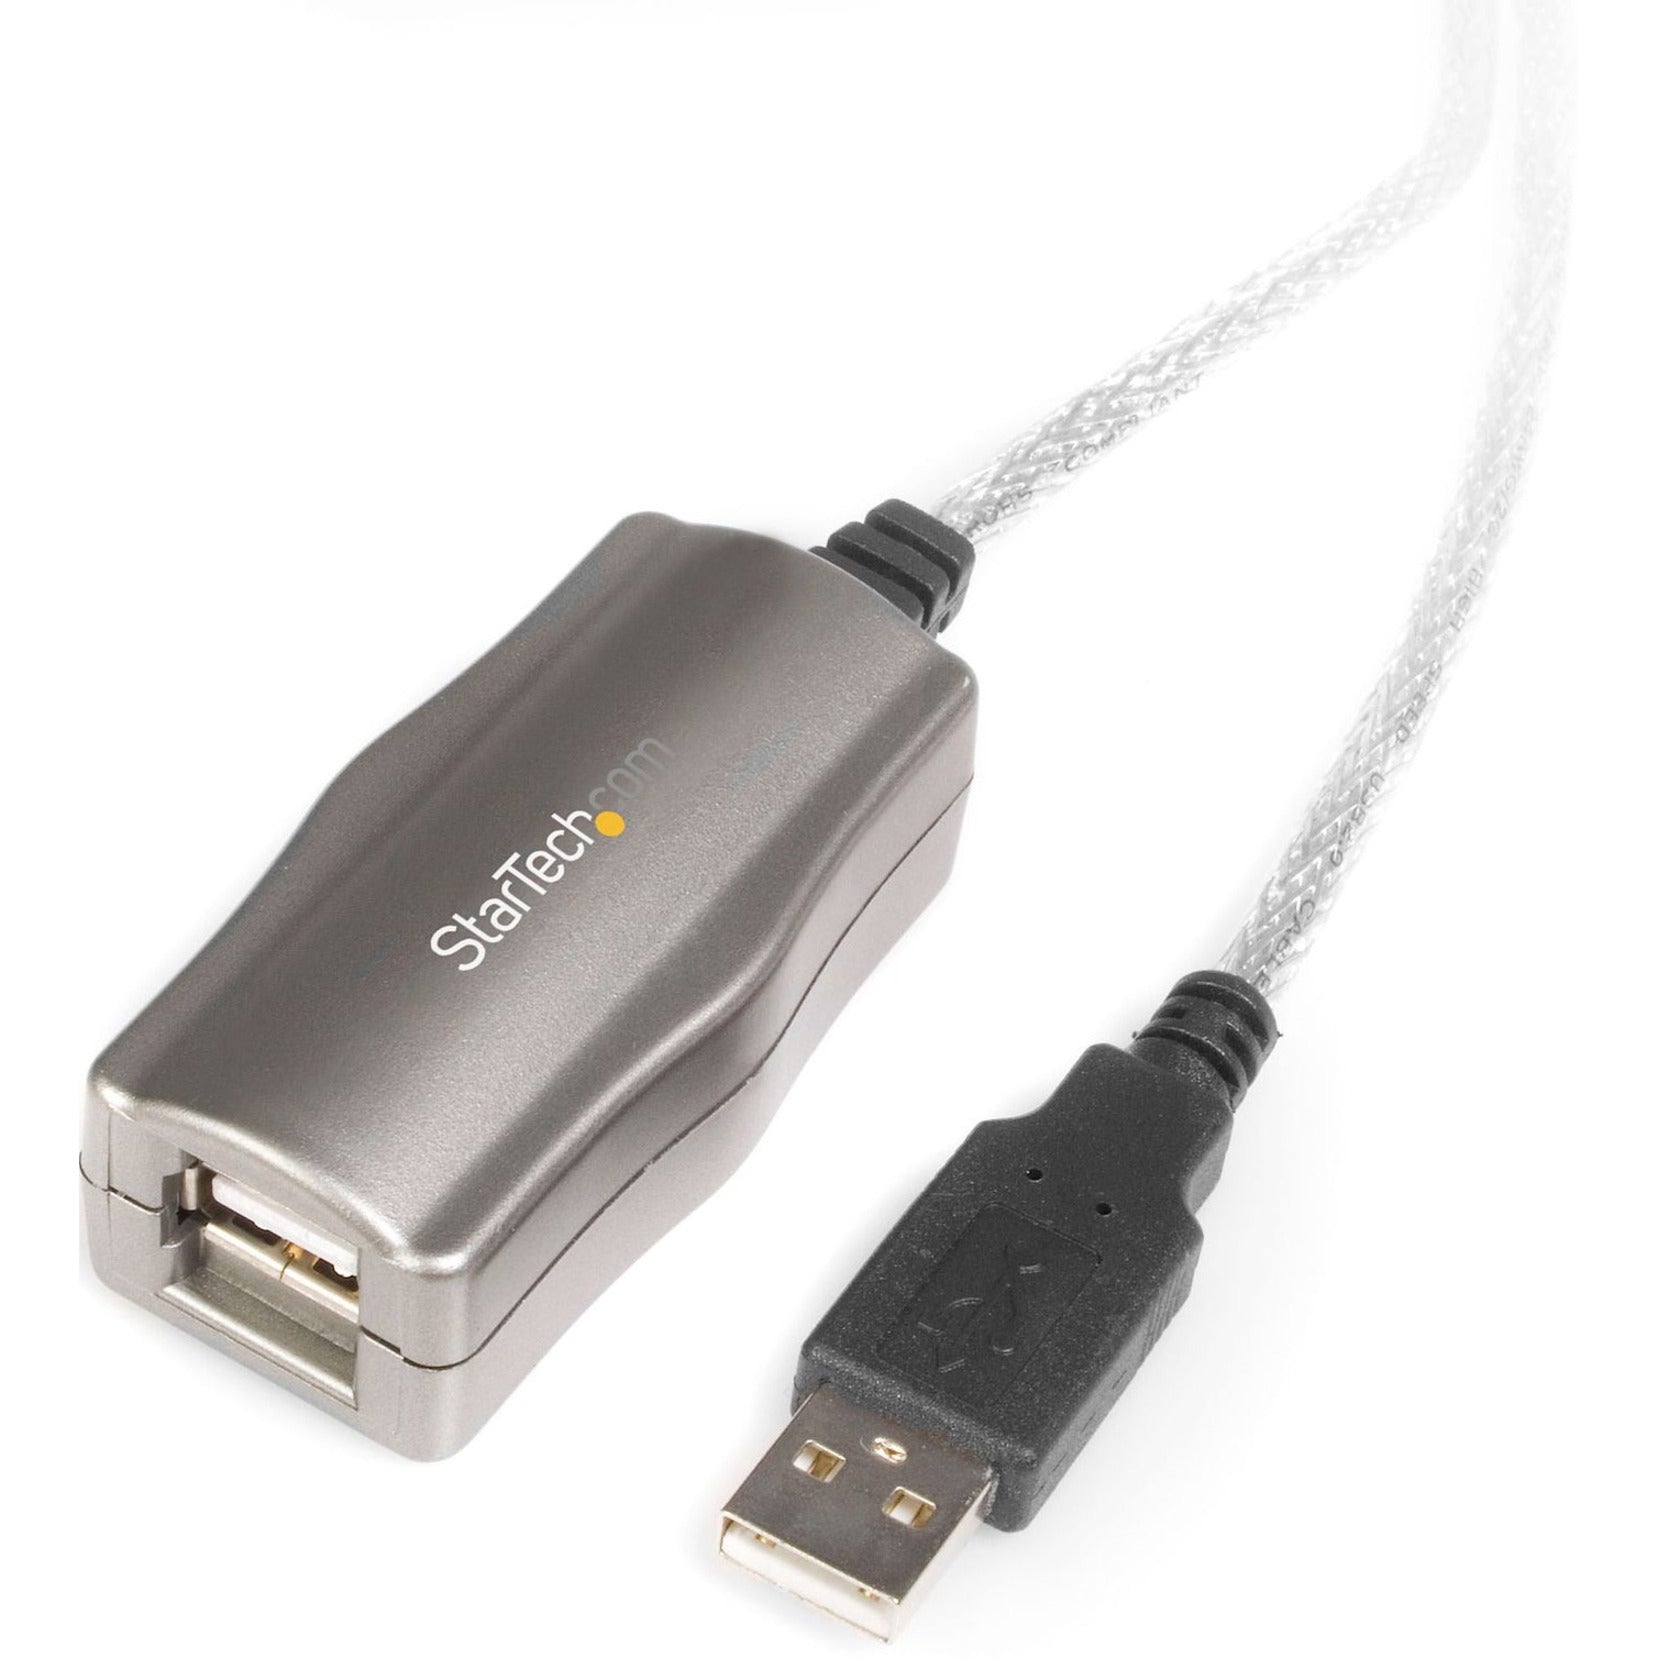 StarTech.com USB2FAAEXT15 15 ft USB 2.0 Active Extension Cable - M/F, Extend USB Connections up to 80ft, Plug & Play, No External Power Required